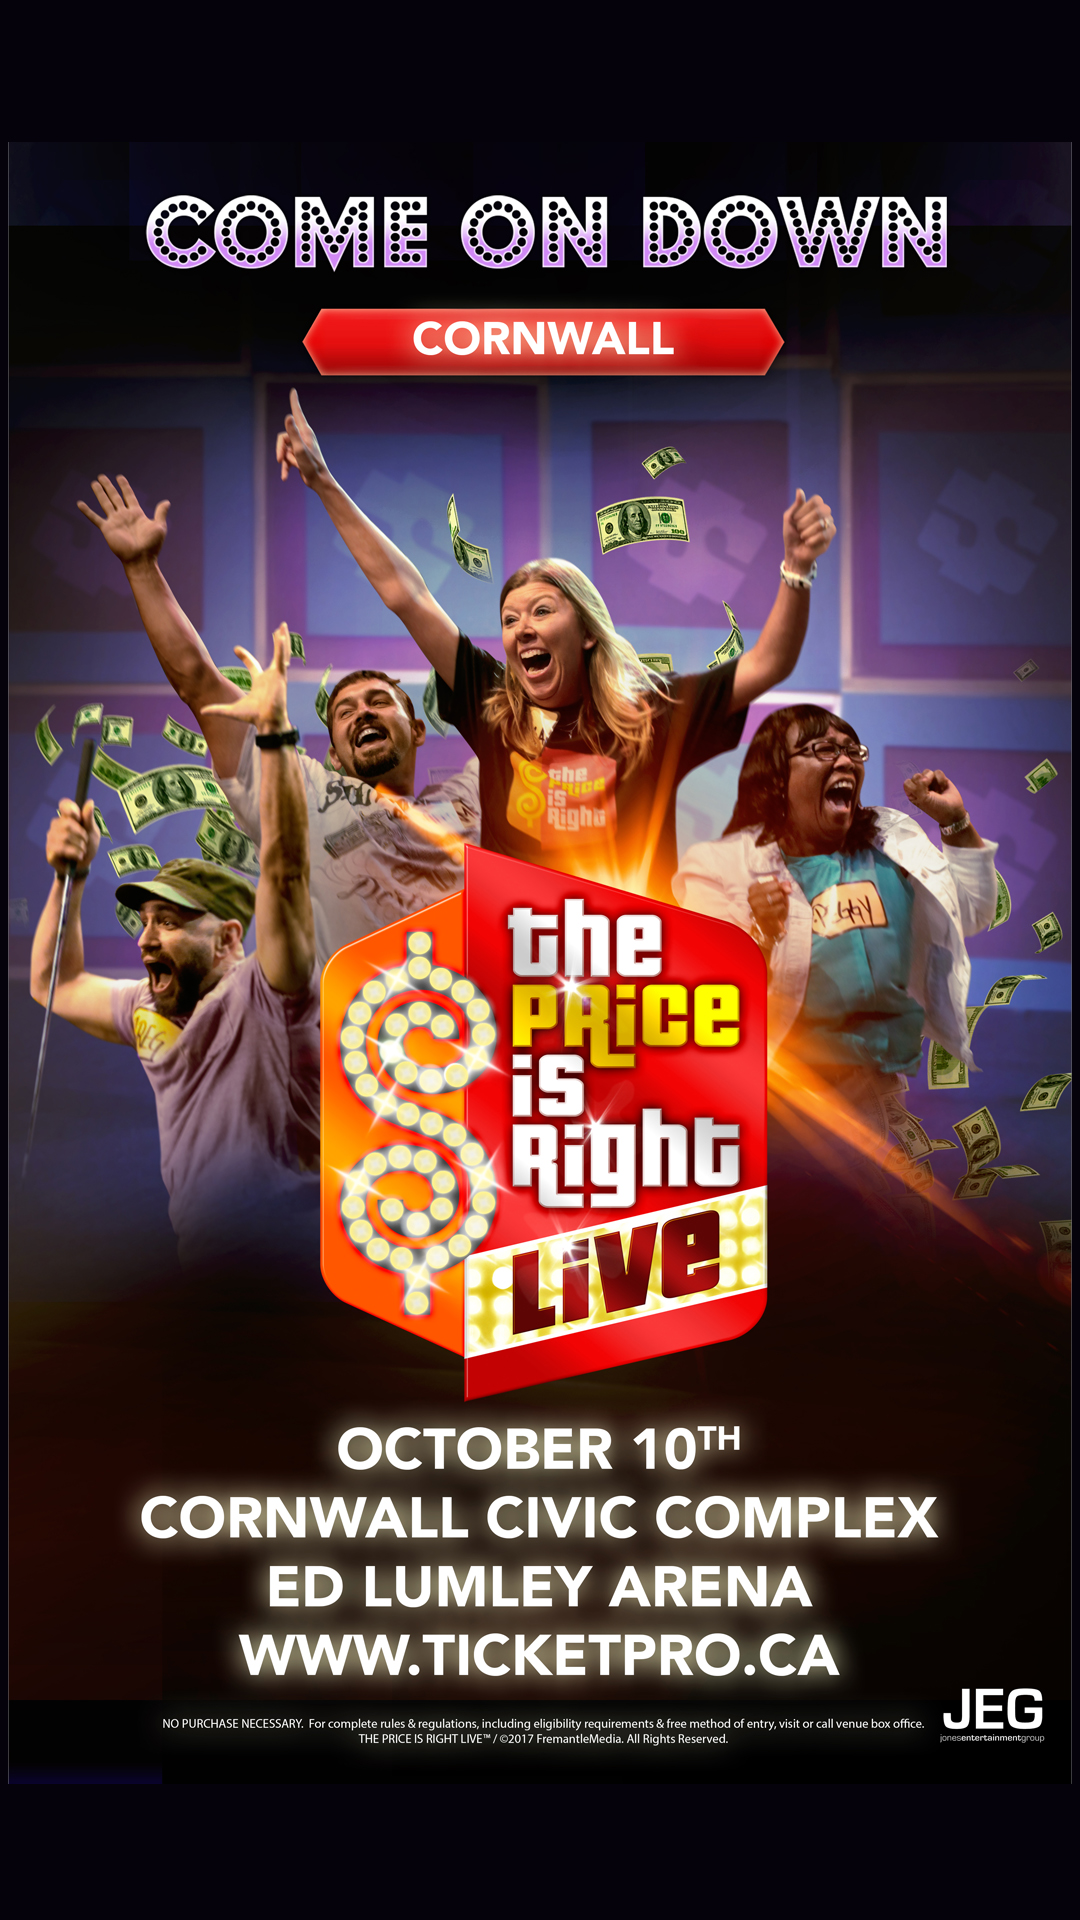 The Price is Right Live